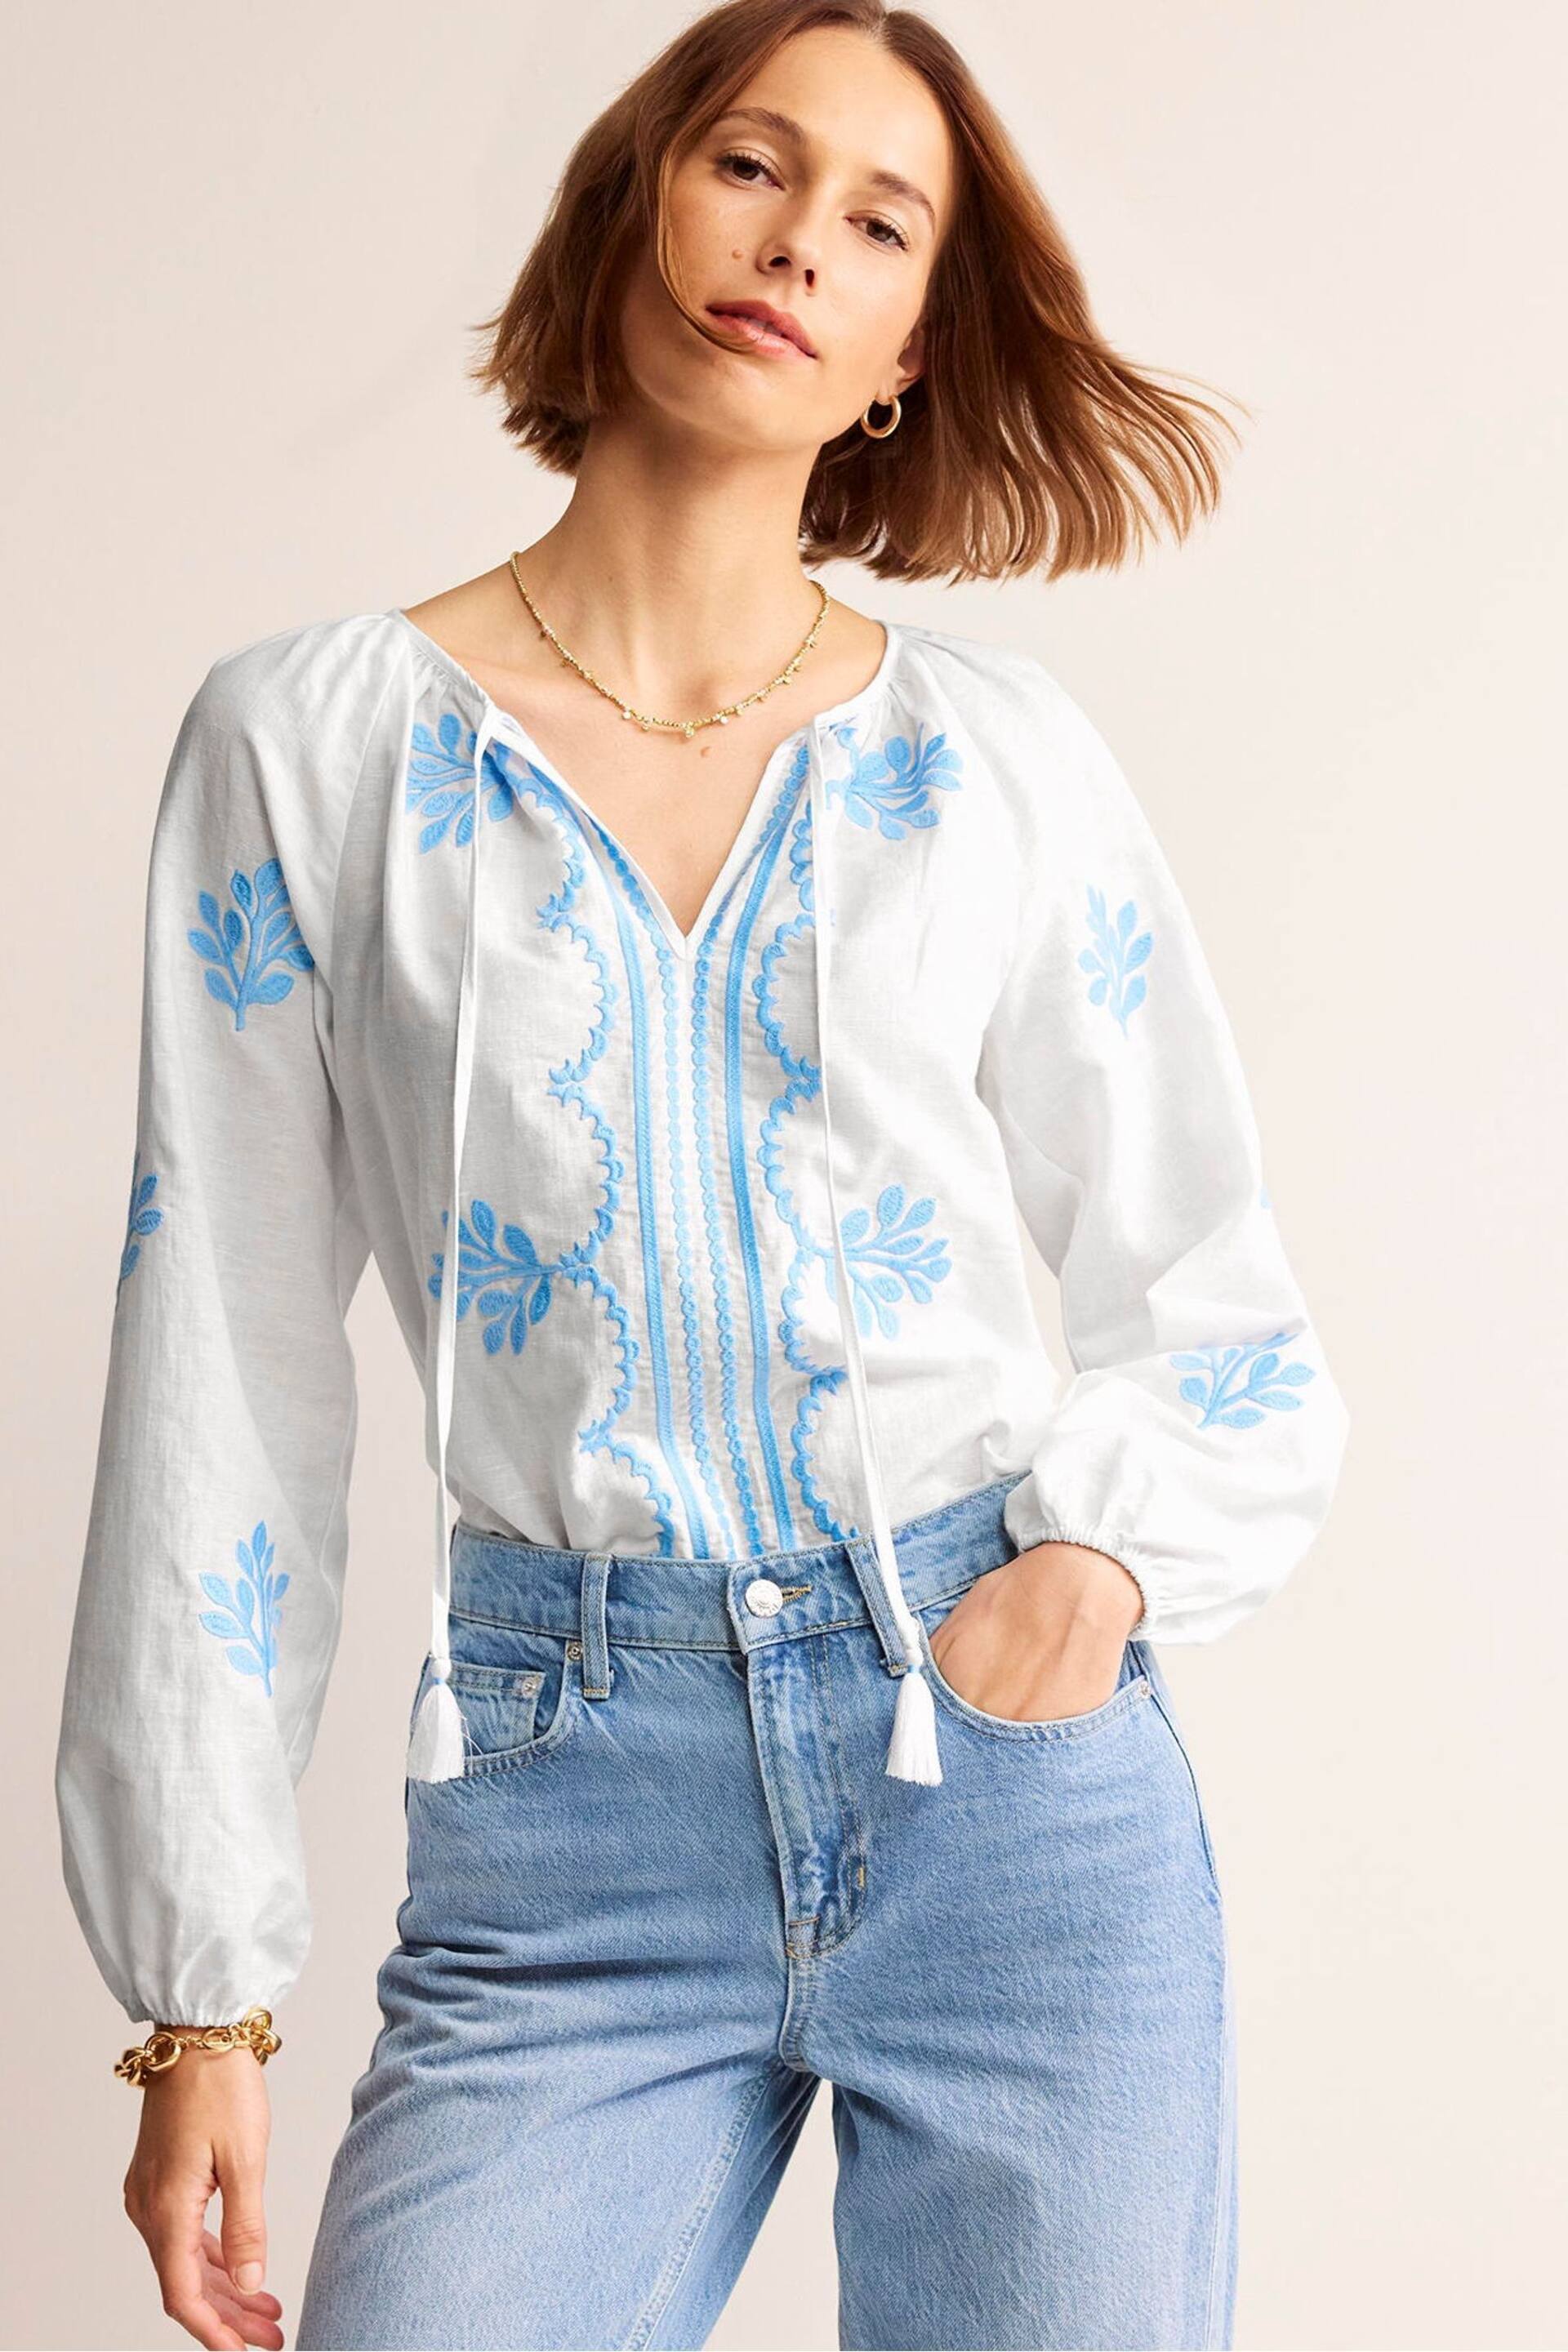 Boden White Serena Embroidered Blouse - Image 4 of 5